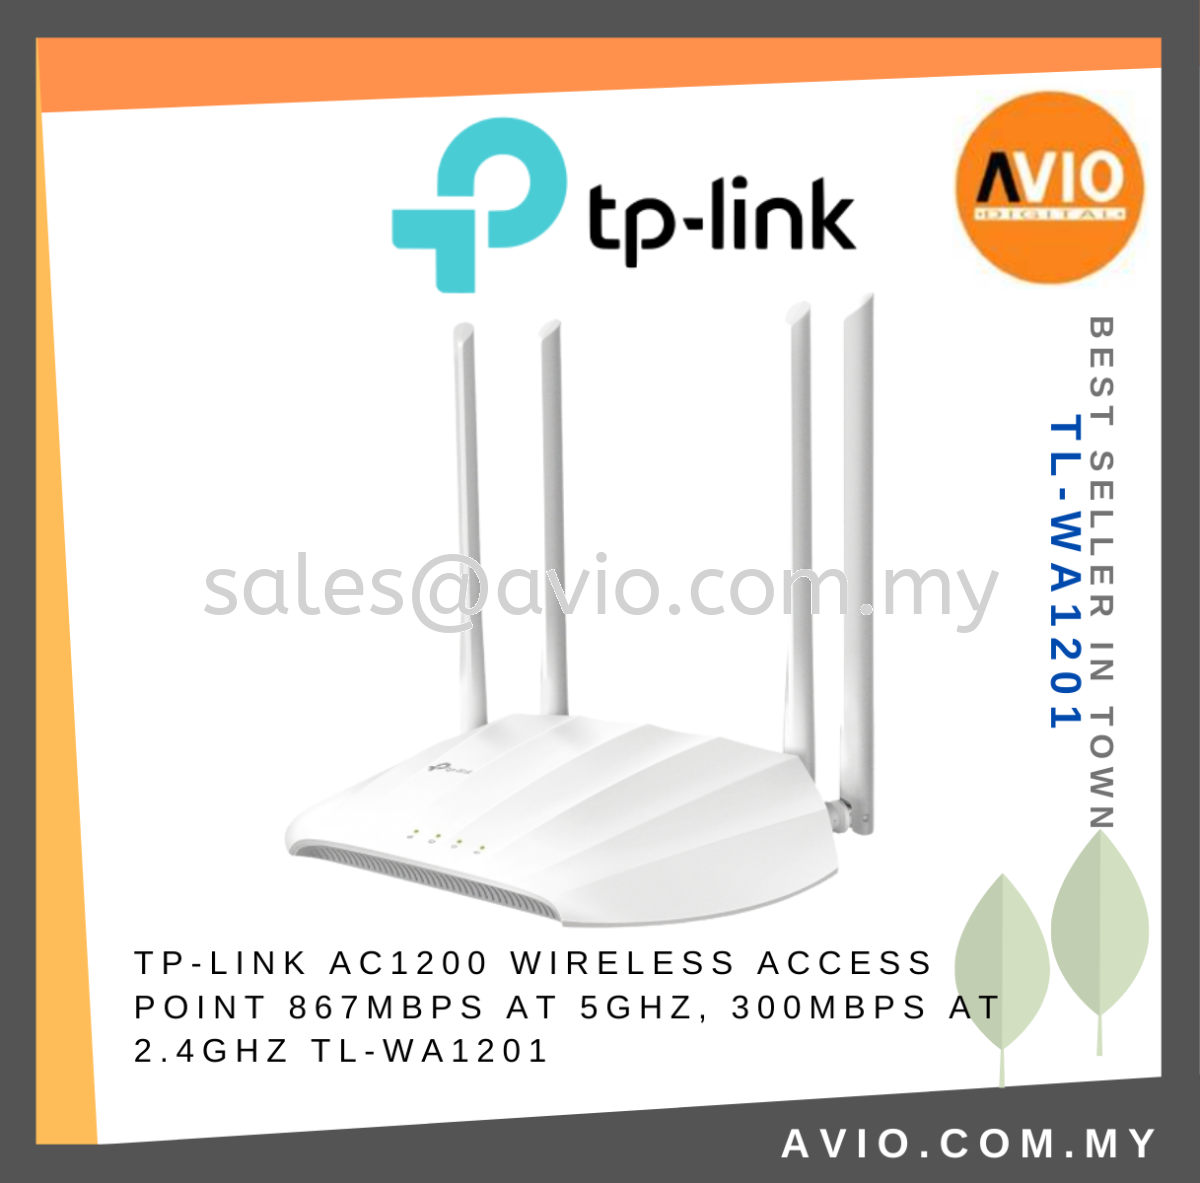 2.4GHz TP-LINK Access 4 SSID Tplink 5GHz Point Extender AC1200 Wireless Dual Band Range